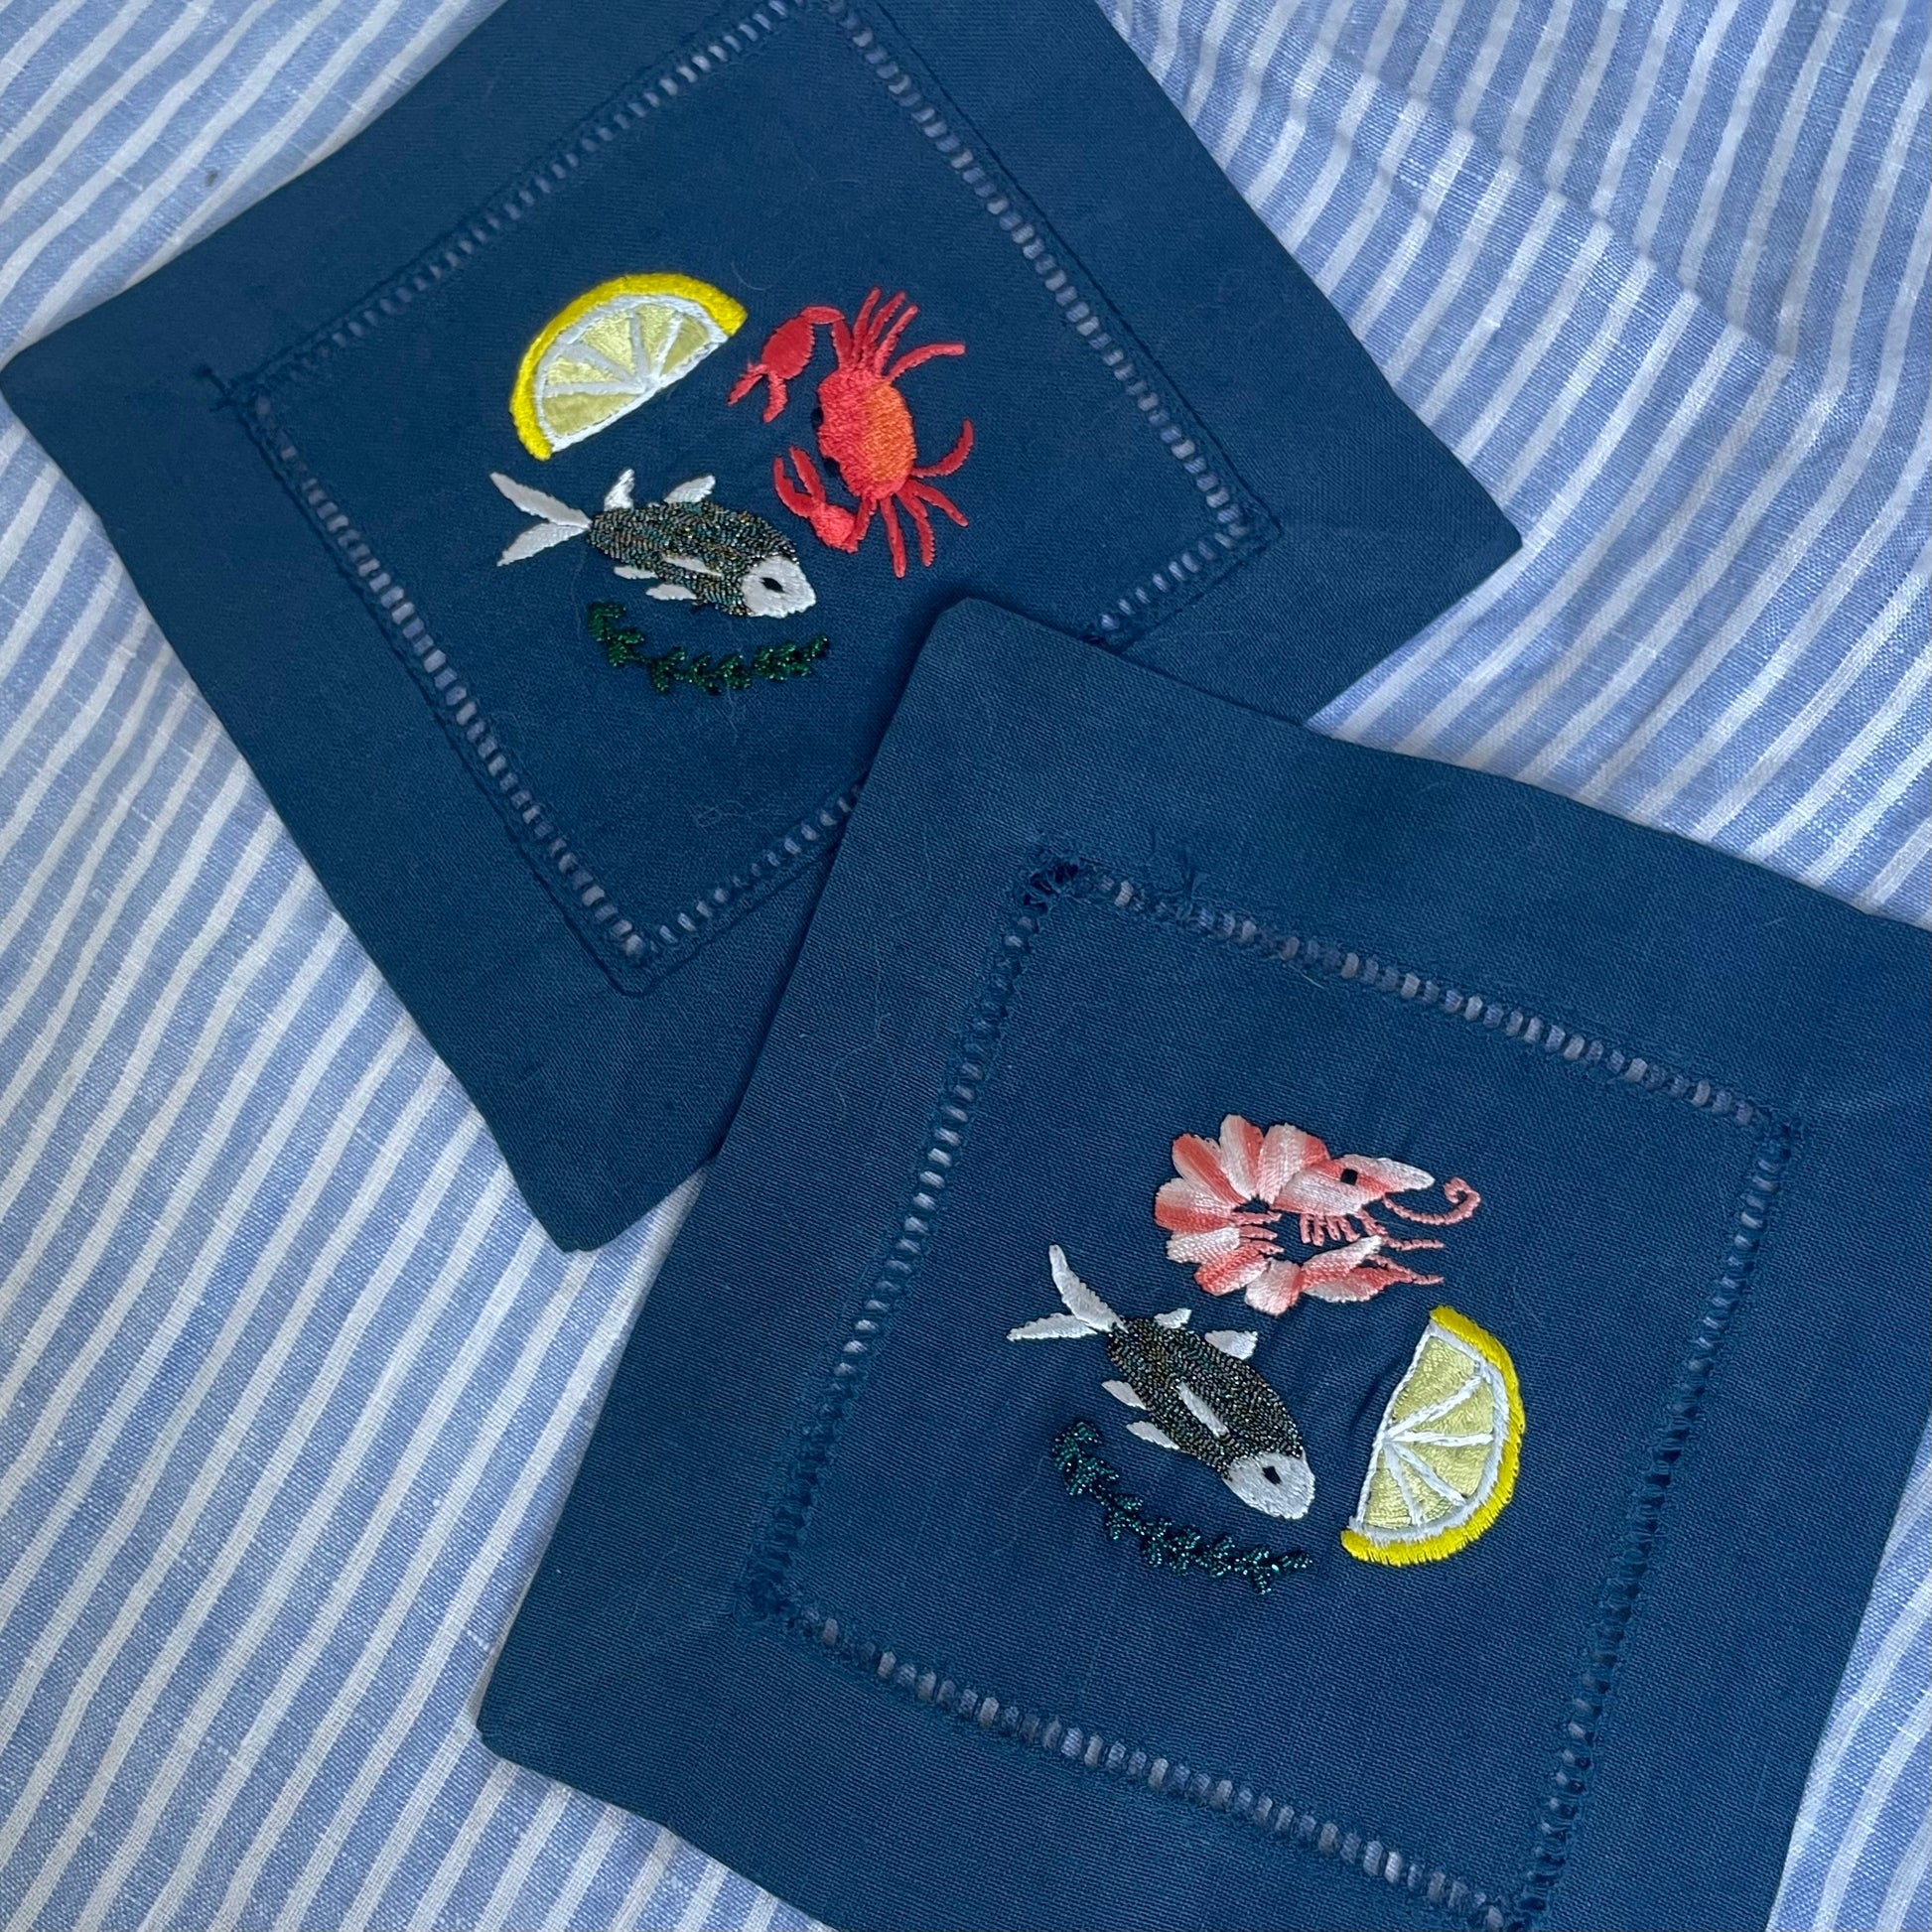 Navy blue linen cocktail napkins with sea creatures embroidery, displayed slightly overlapping on a blue and white striped cloth